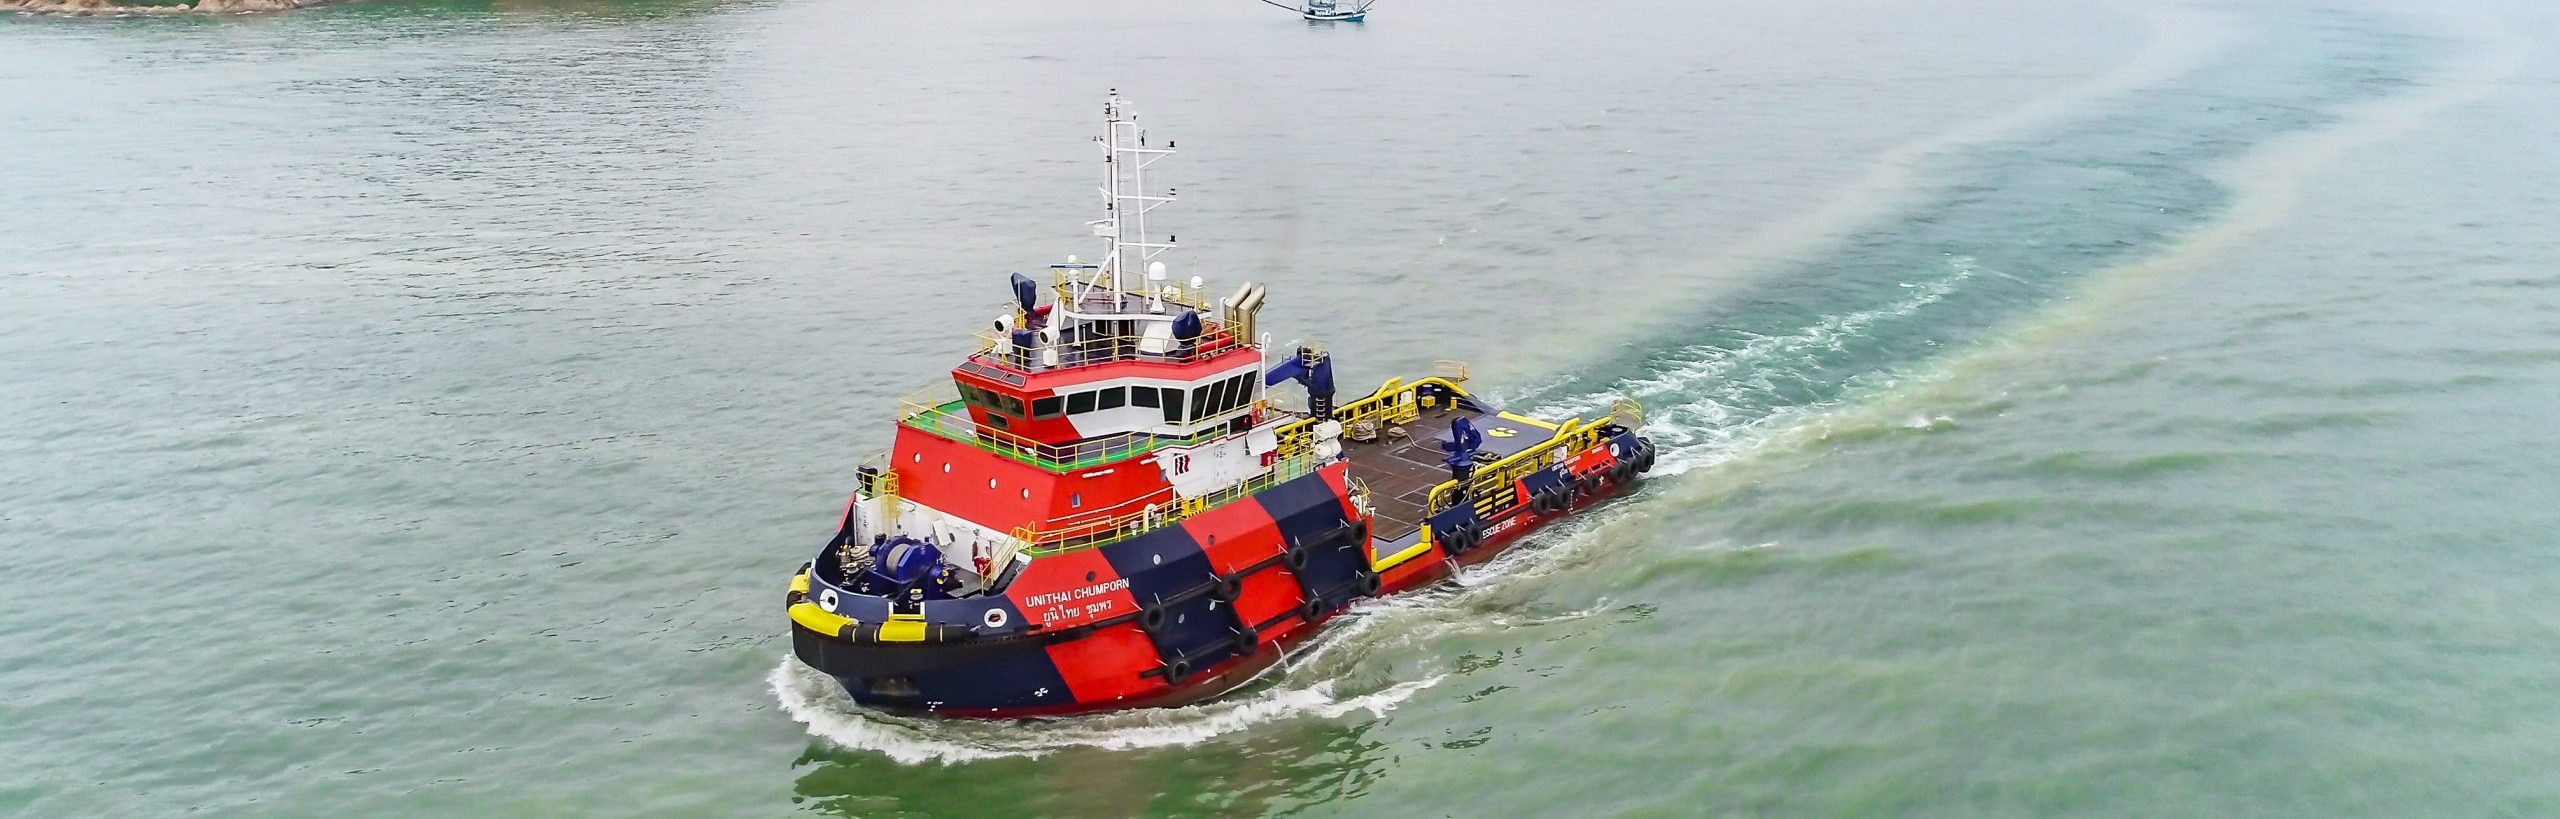 First Class Multi-Purpose Utility Vessel 80 Tons Bollard Pull (2 vessels), built by Unithai Shipyard for long term Service Contract to Chevron Thailand